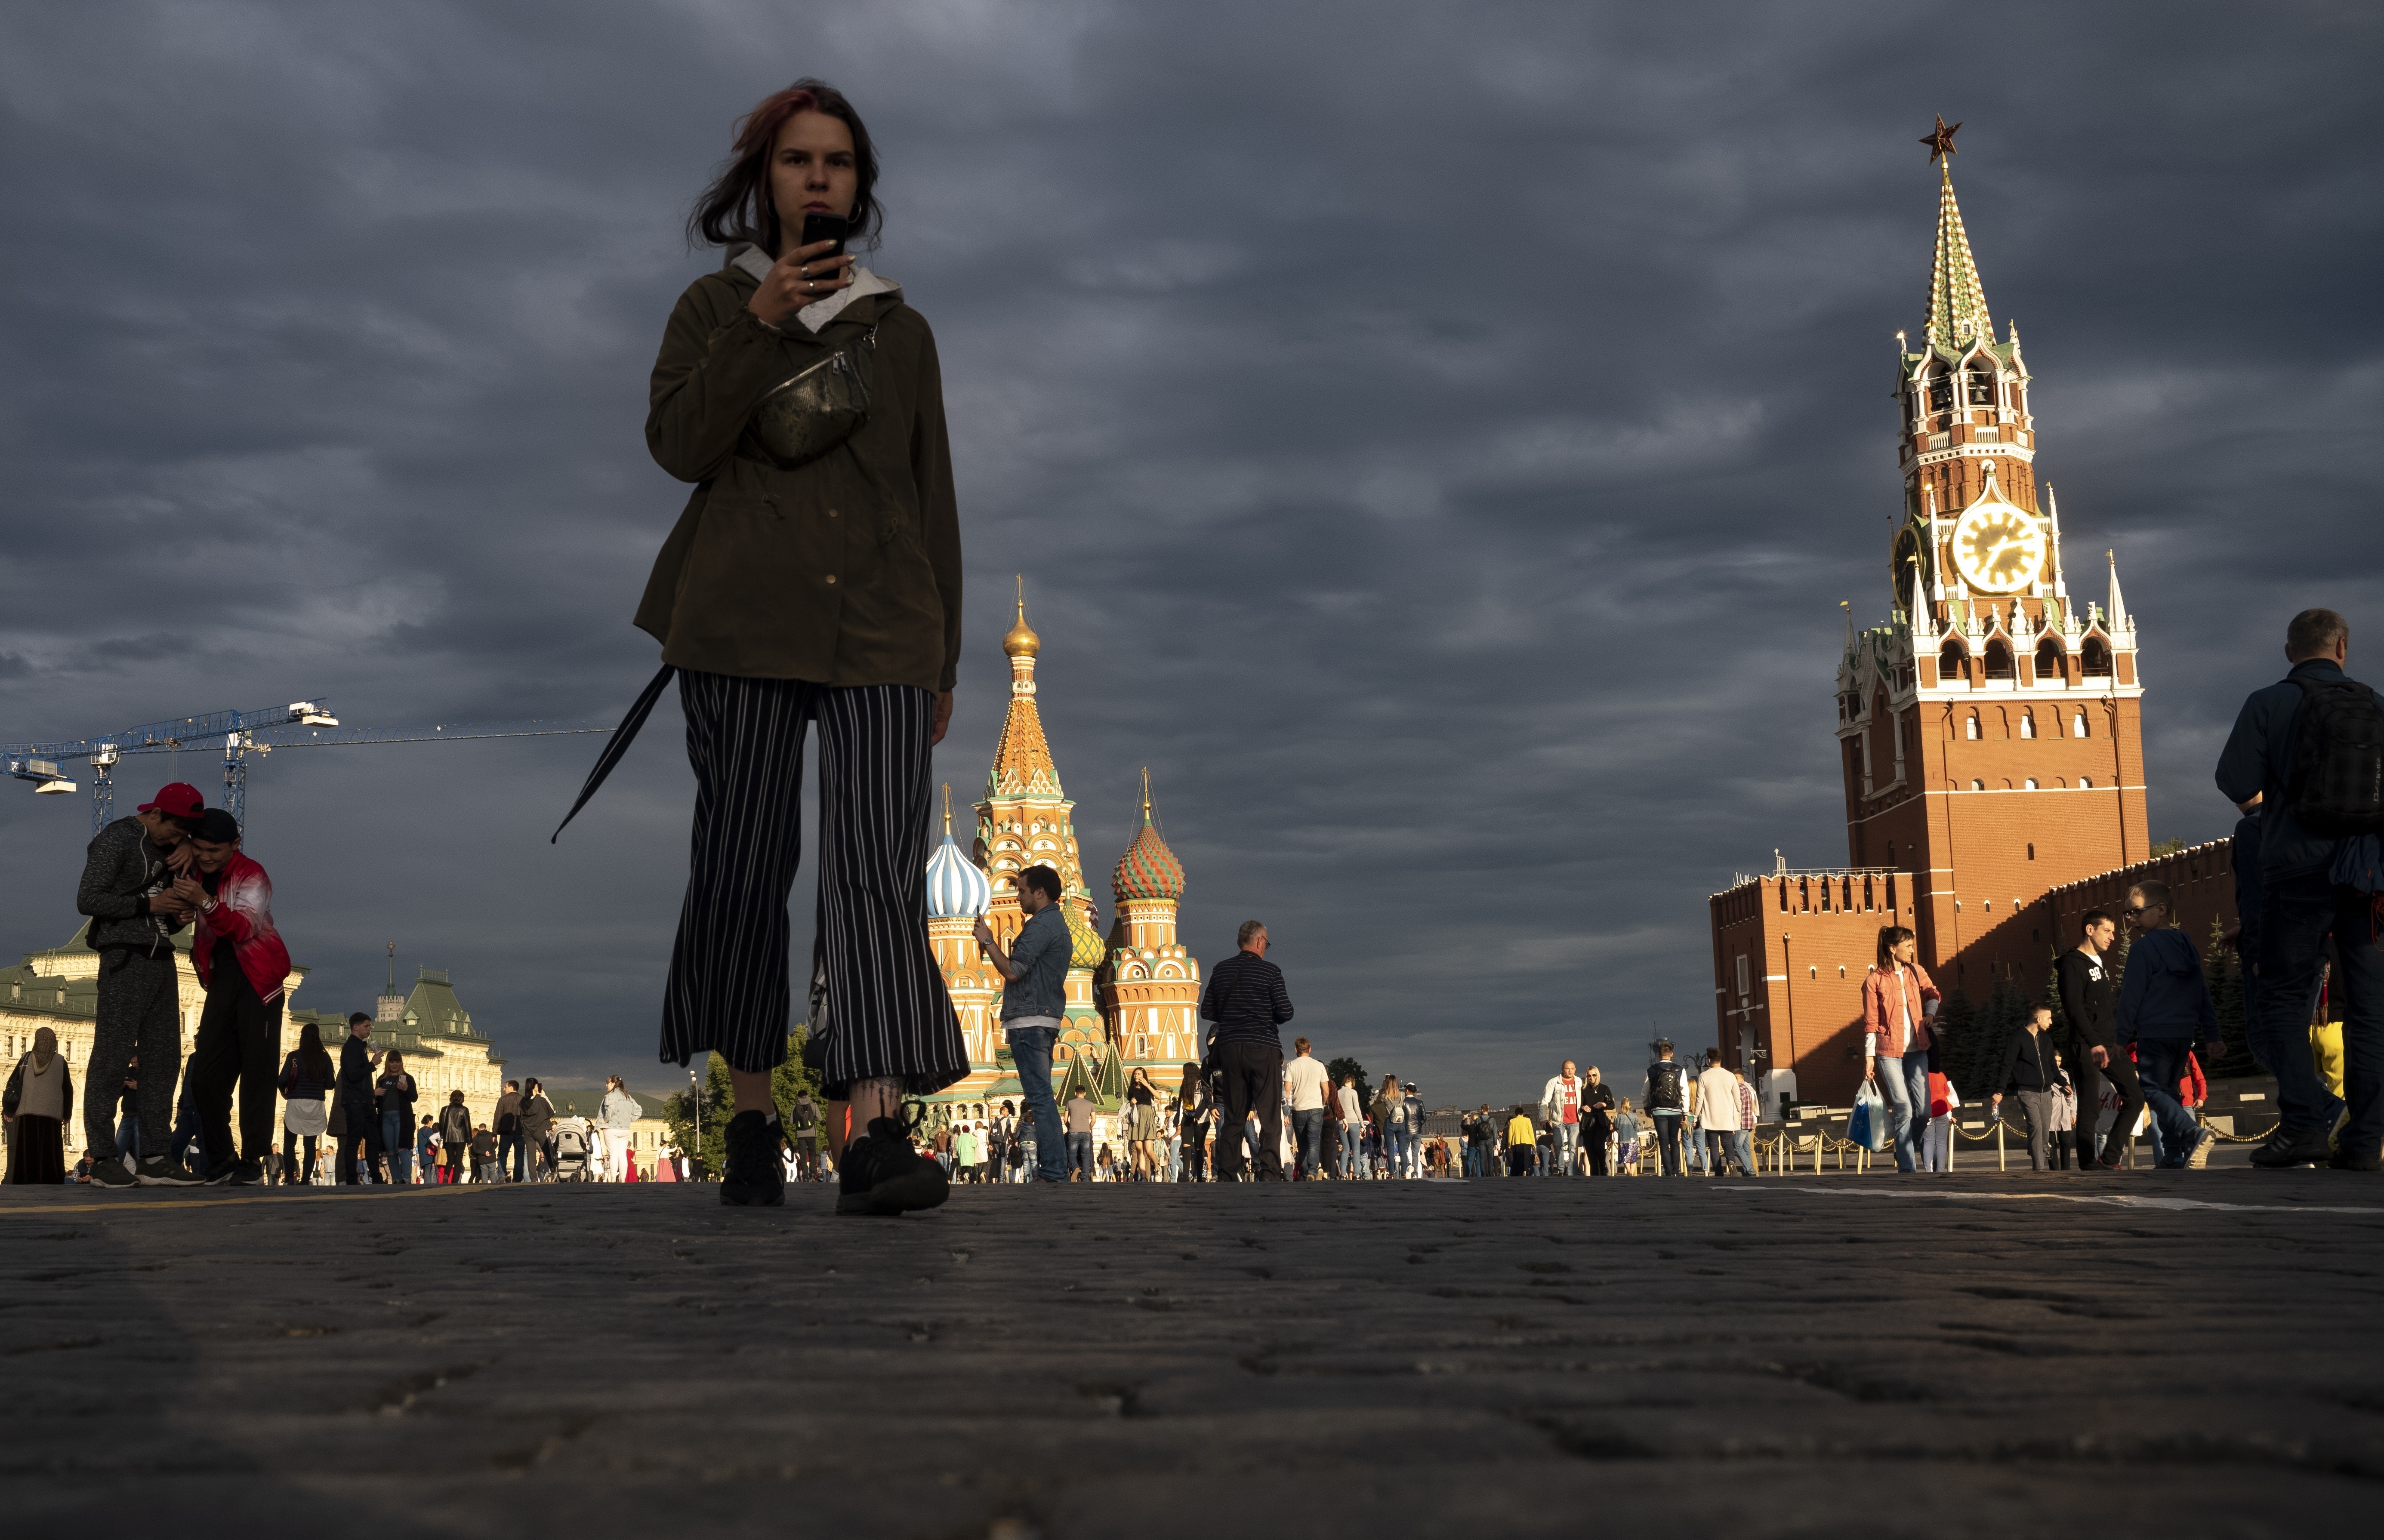 A woman walks through Red Square during sunset in Moscow, Russia, Sunday, July 7, 2019. The temperature in Moscow has dropped to 20 degrees Celsius. (AP Photo/Alexander Zemlianichenko)